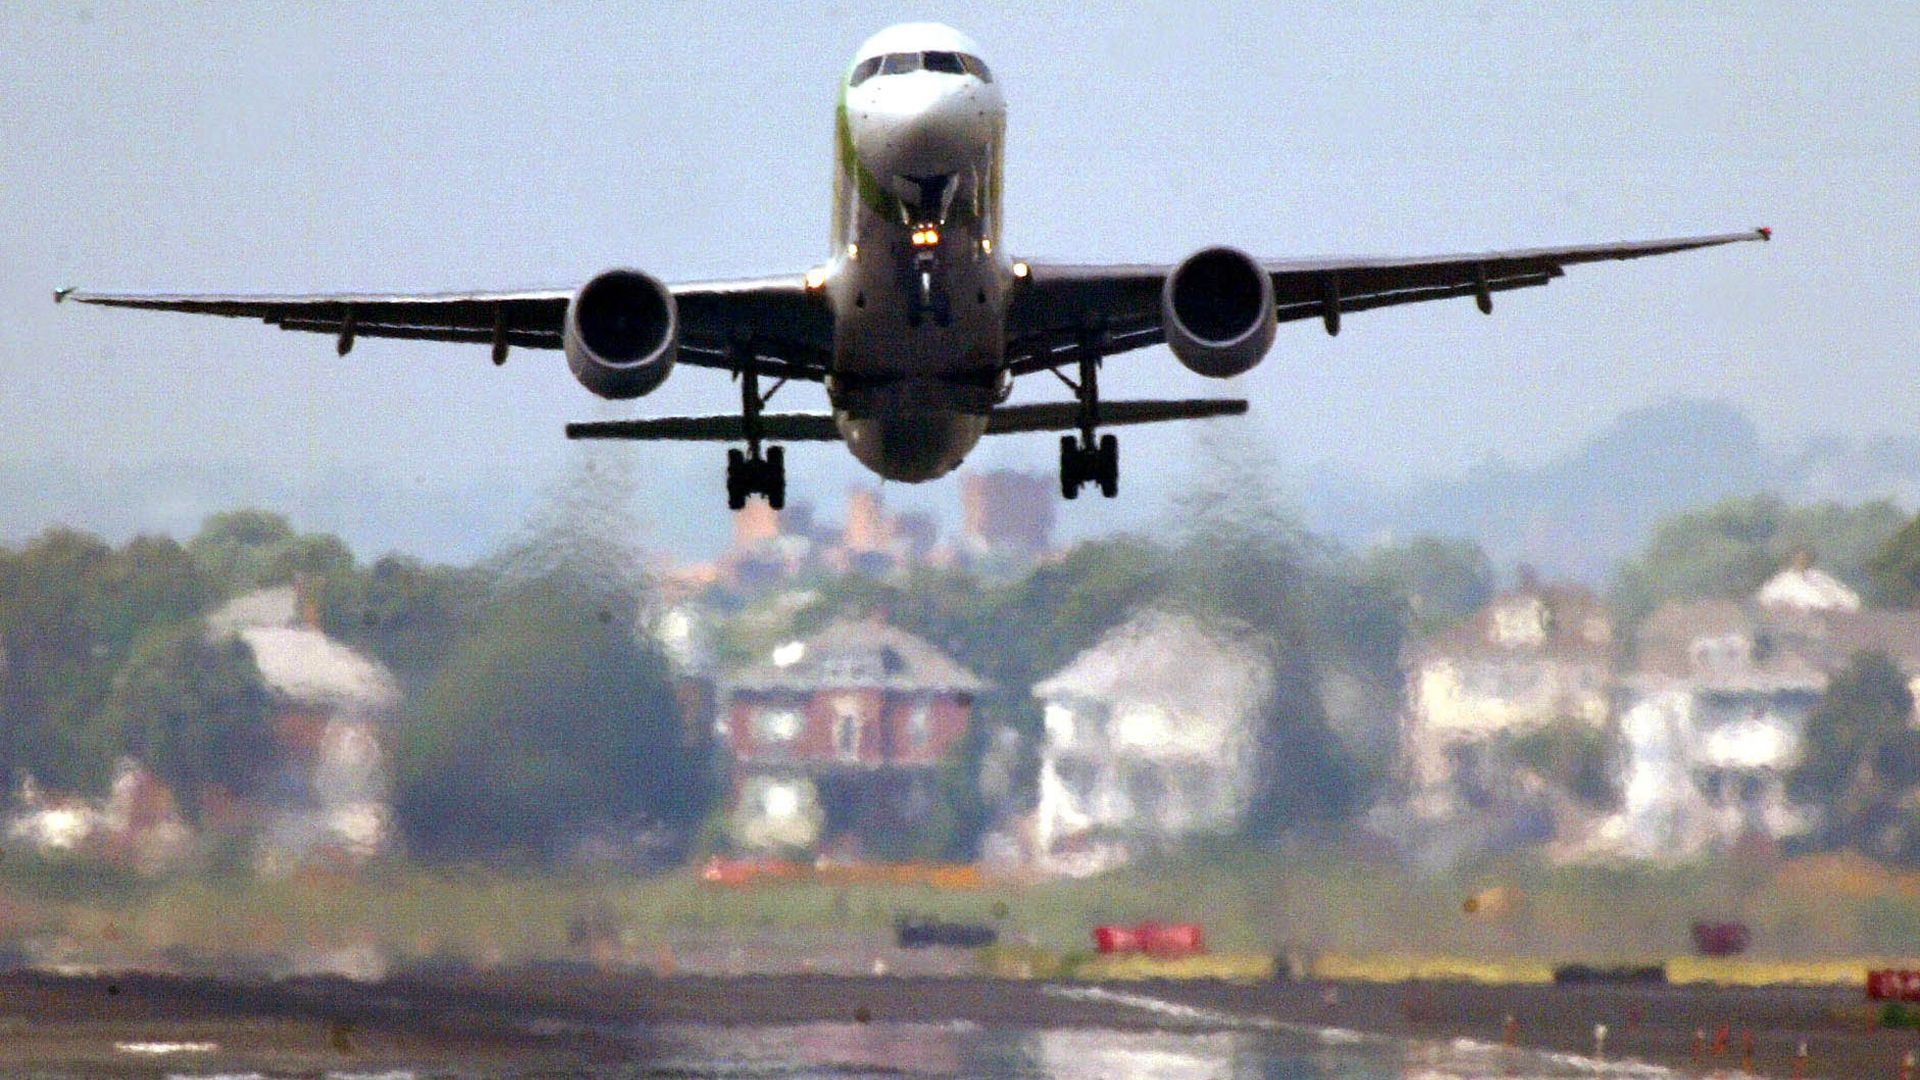 An aircraft departs from Boston Logan International Airport on August 9, 2005.